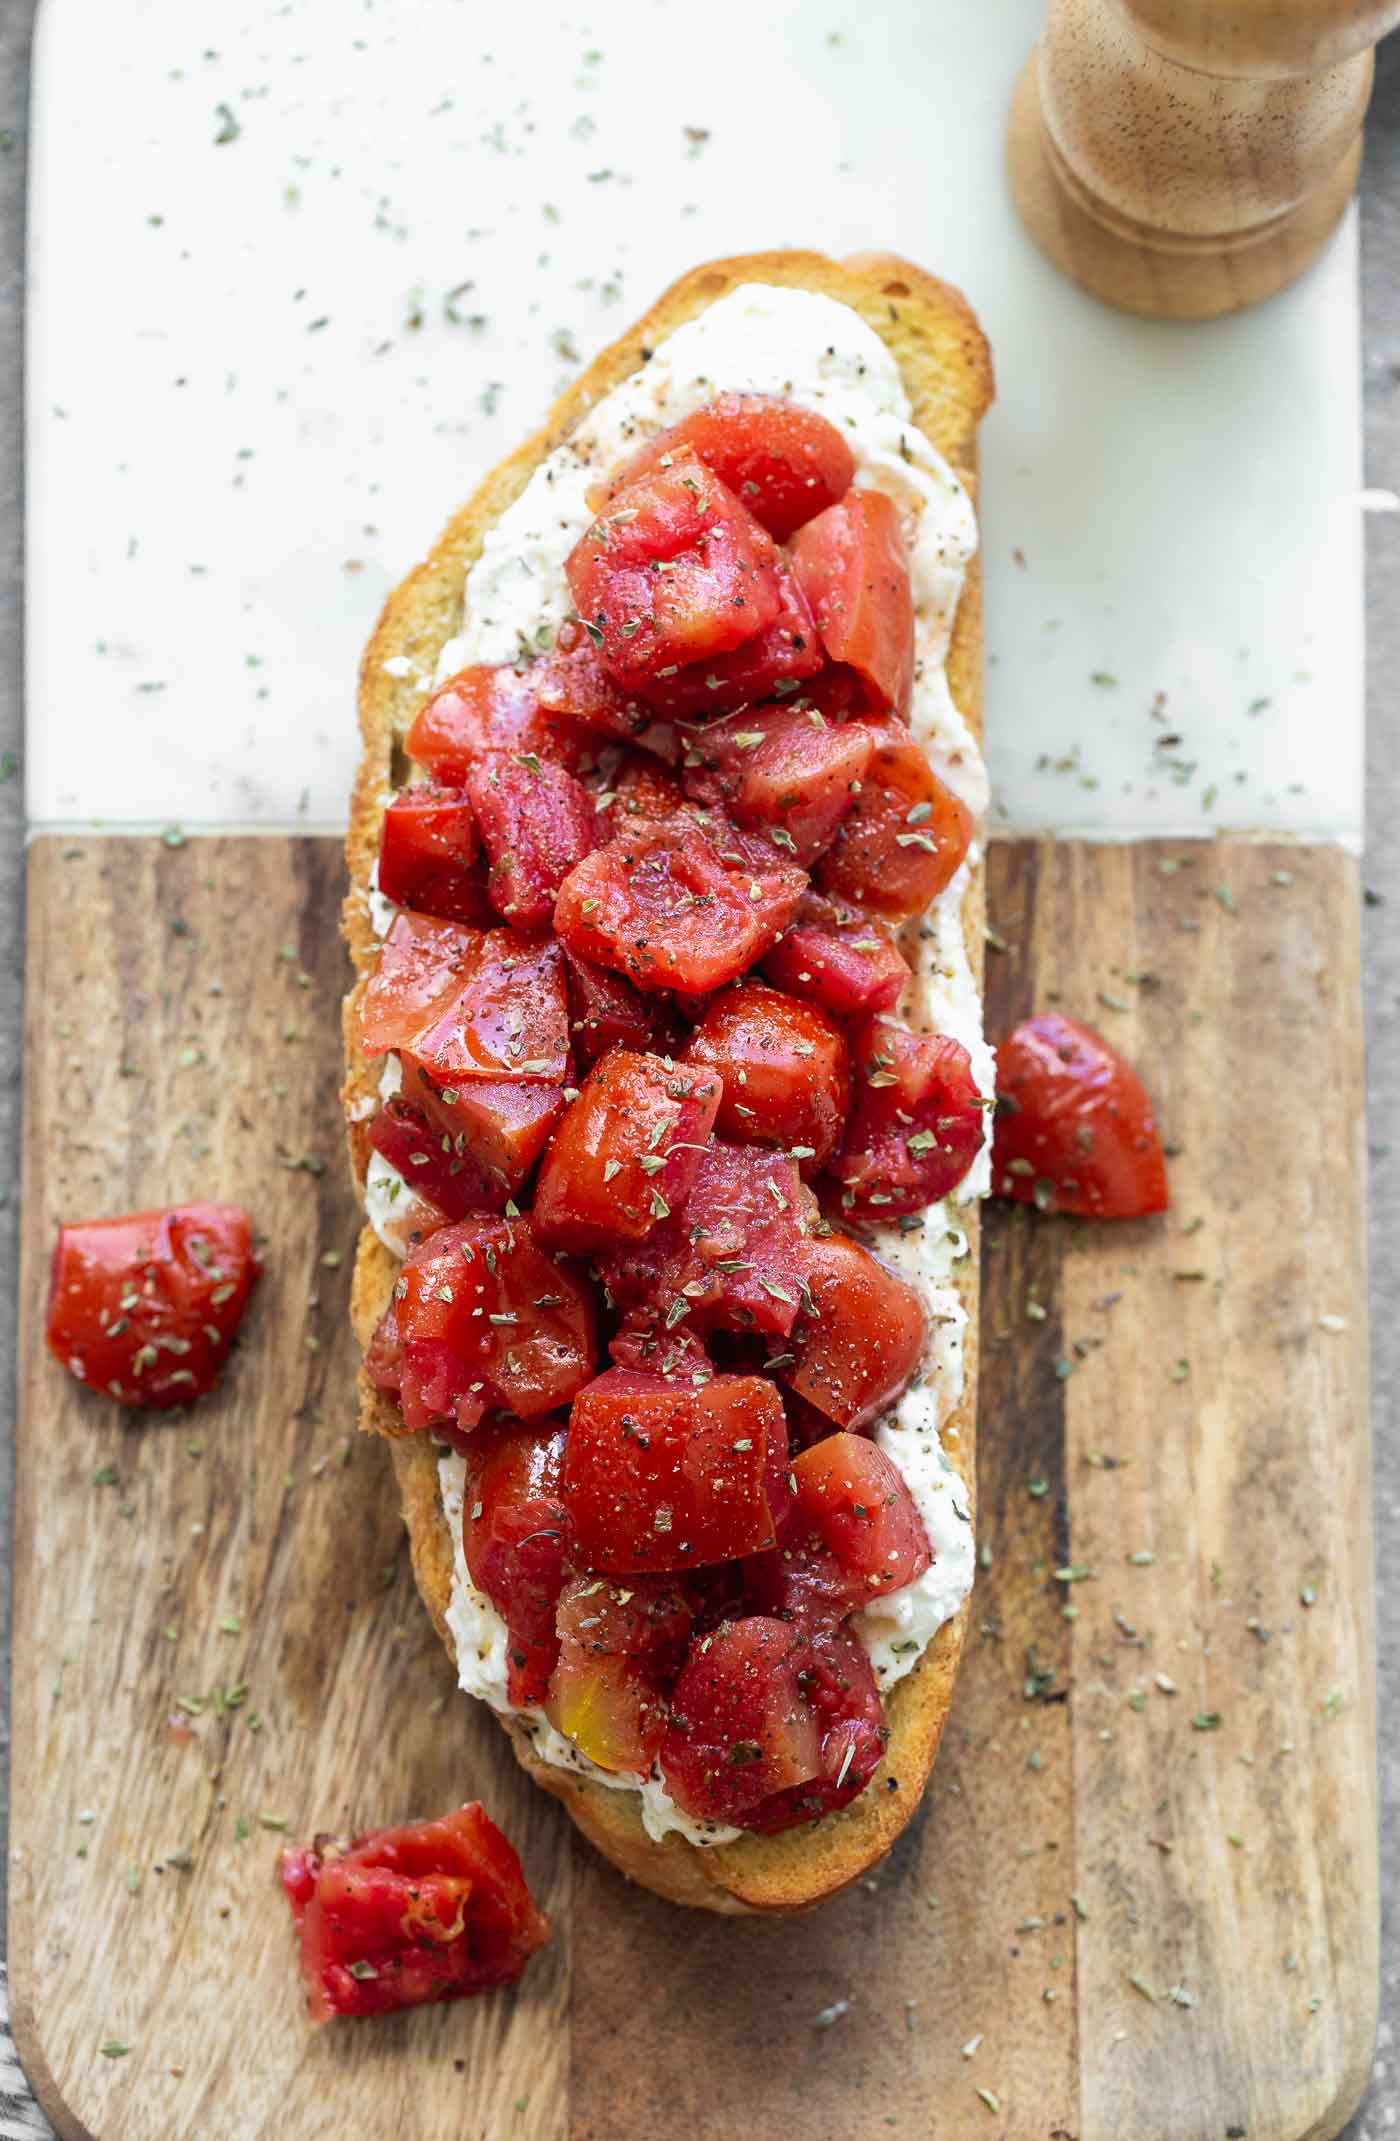 rispy French bread halves are seasoned with salt and pepper and baked until golden and crisp. They're brushed with garlic, then smothered with creamy whipped ricotta and topped with simply seasoned tomatoes. Serve with a crisp salad or as an appetizer! 